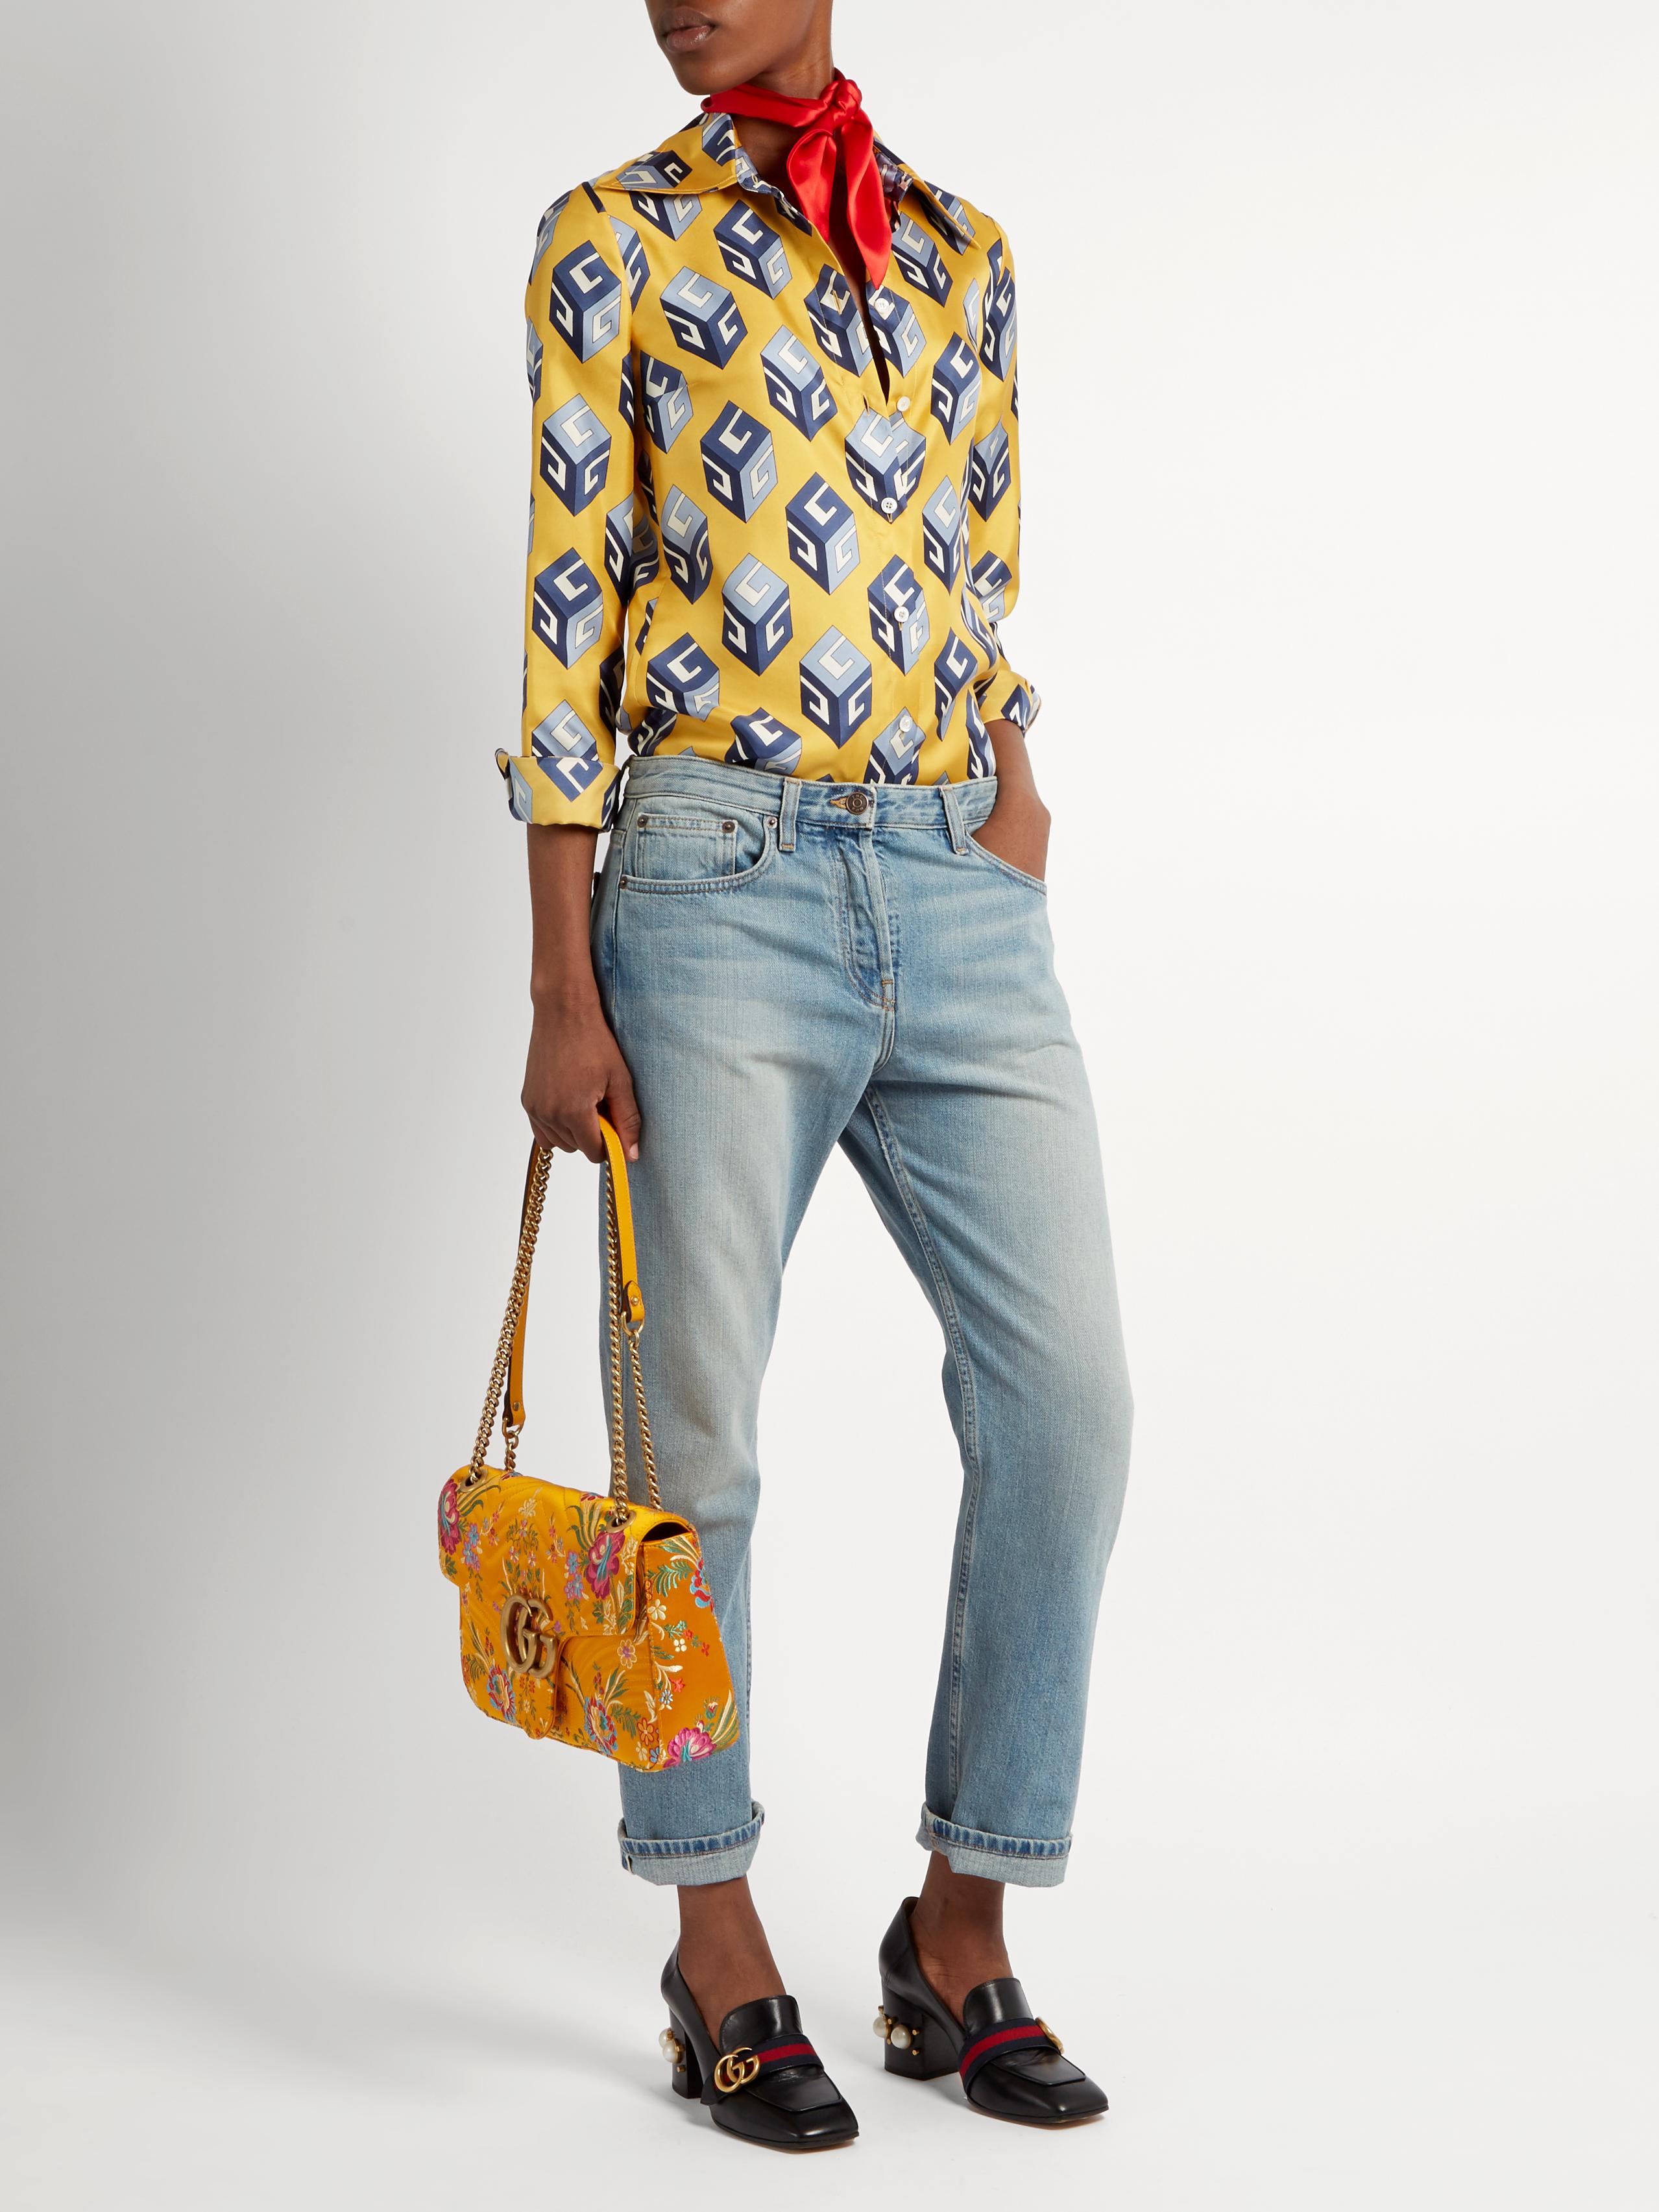 Gucci Gg Marmont Floral-jacquard Shoulder Bag in Yellow | Lyst